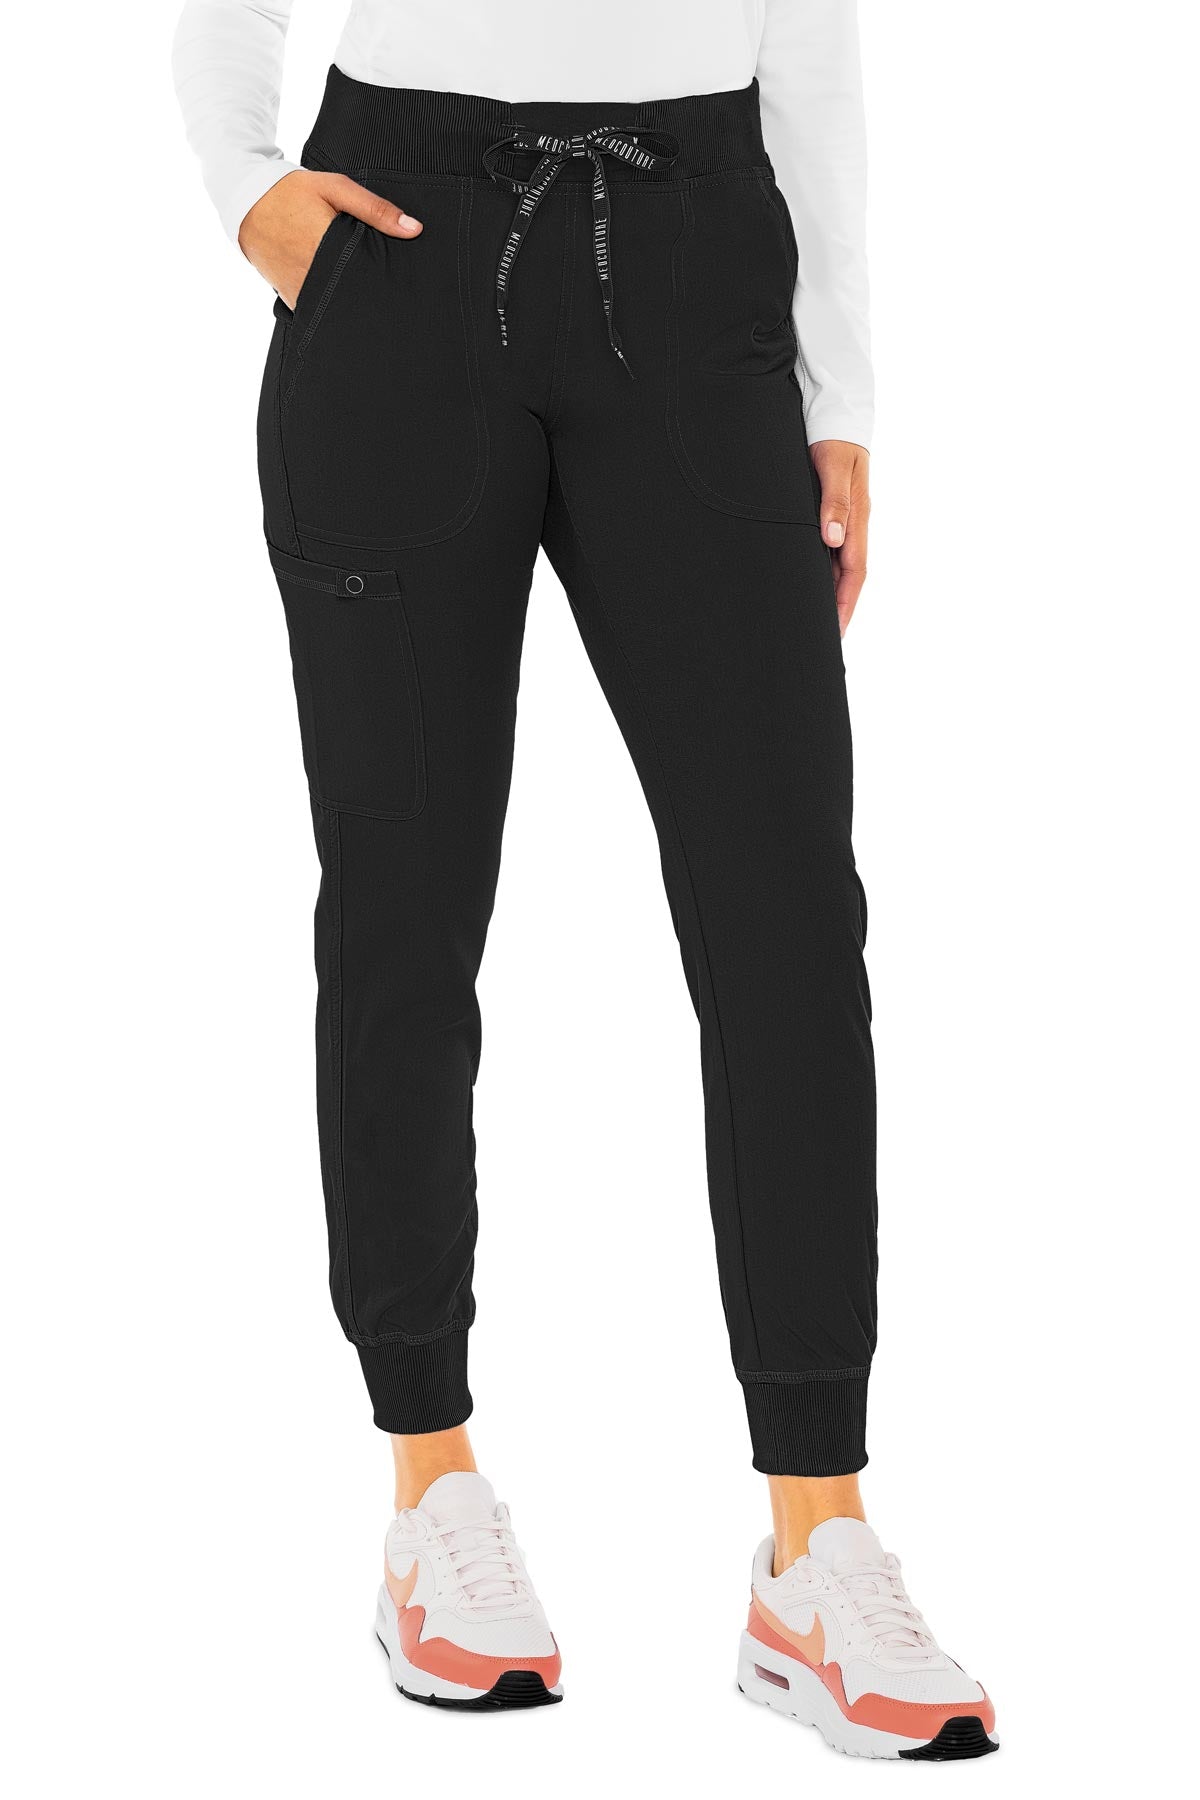 Med Couture Black PANT